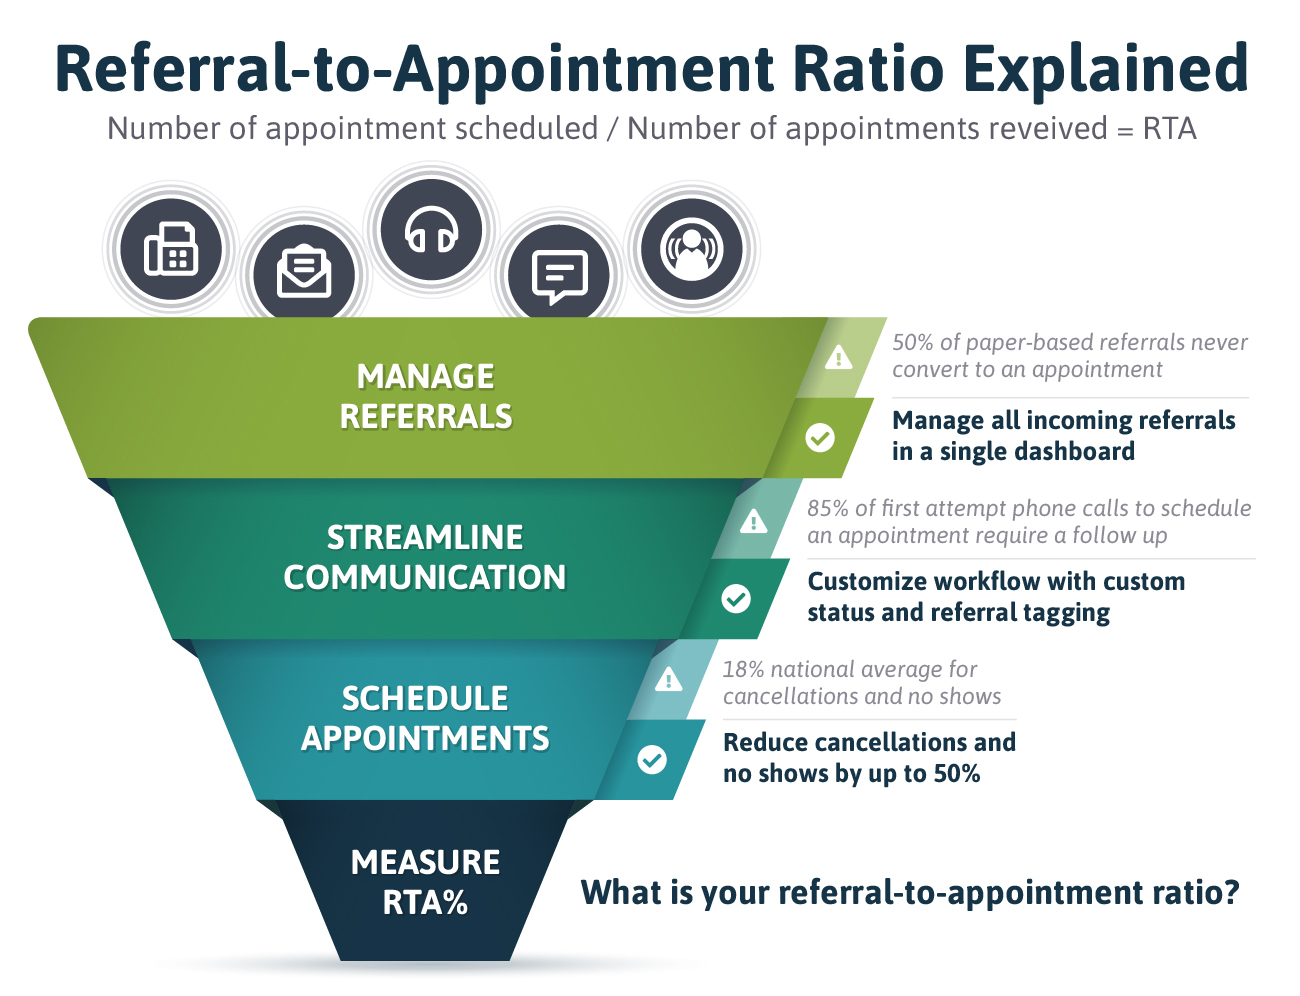 3 Ways to Instantly Improve the Referral-to-Appointment Ratio of Your Practice